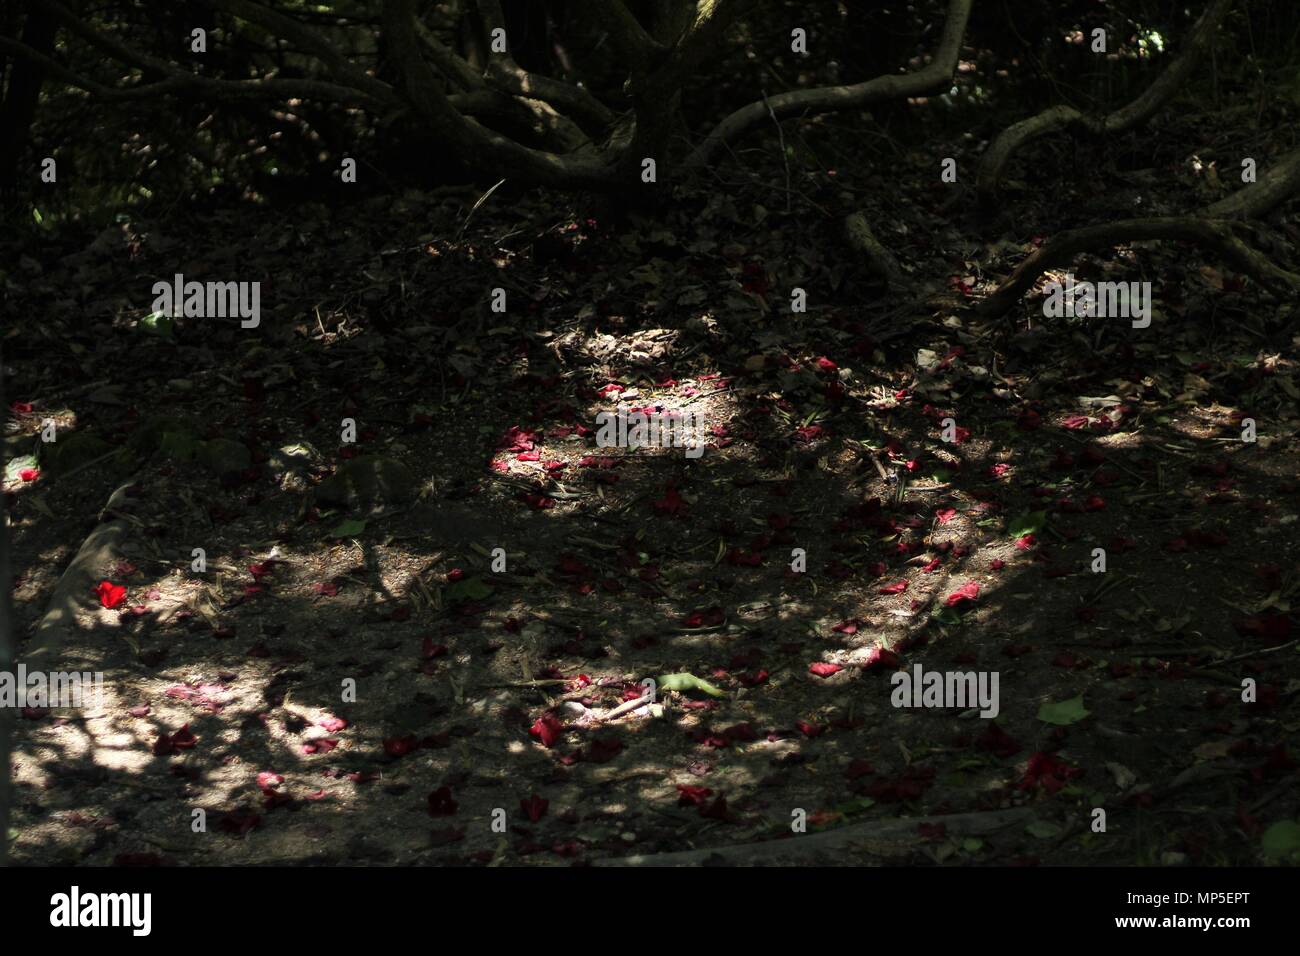 Red blossom and petals settle on floor path of an old growth forest in Kent, Britain. Stock Photo